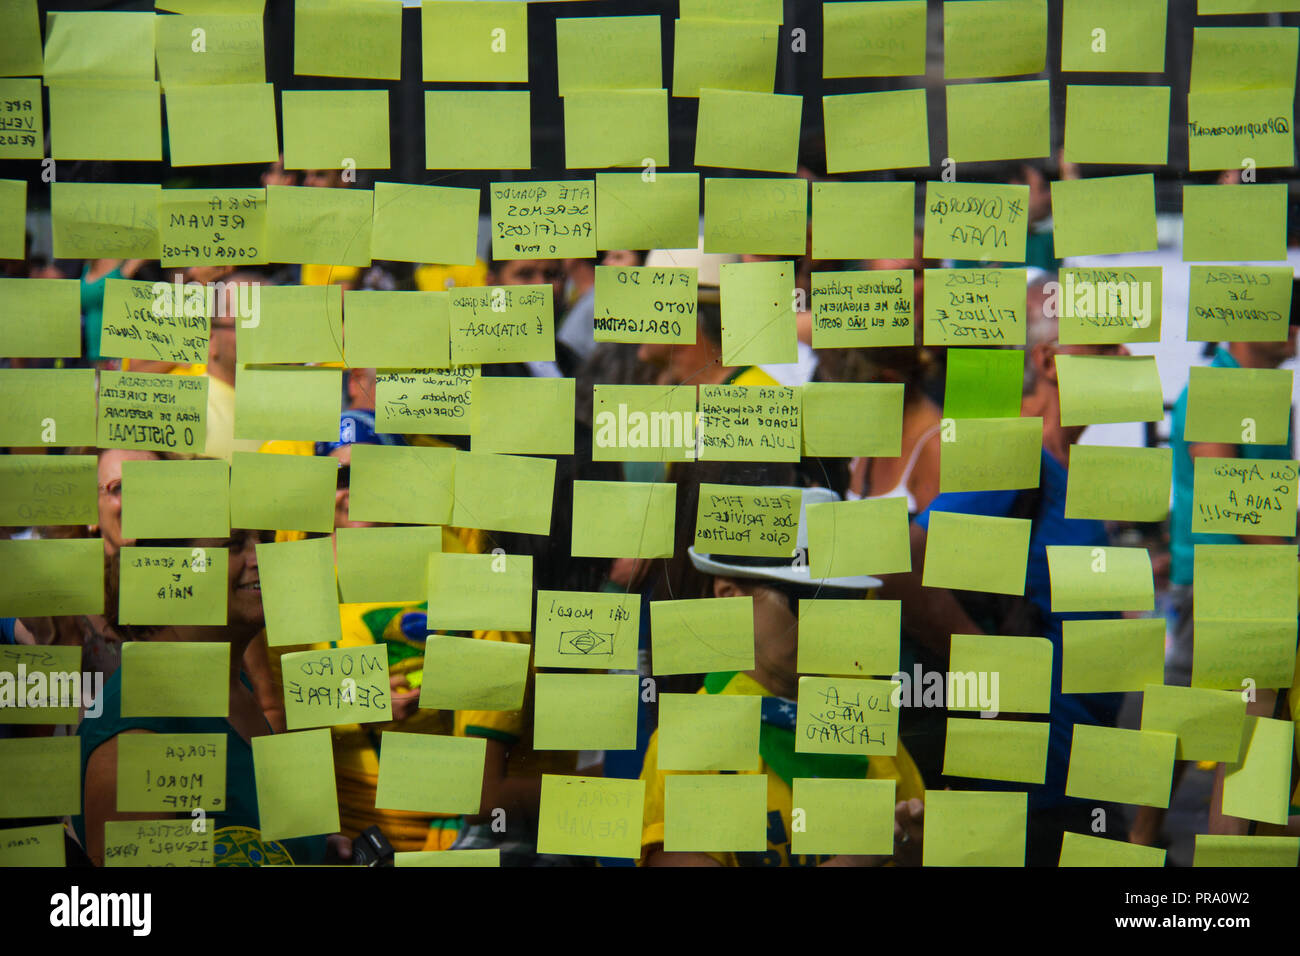 Business wallpaper background of yellow post-it sticky notes on a glass  wall Stock Photo - Alamy